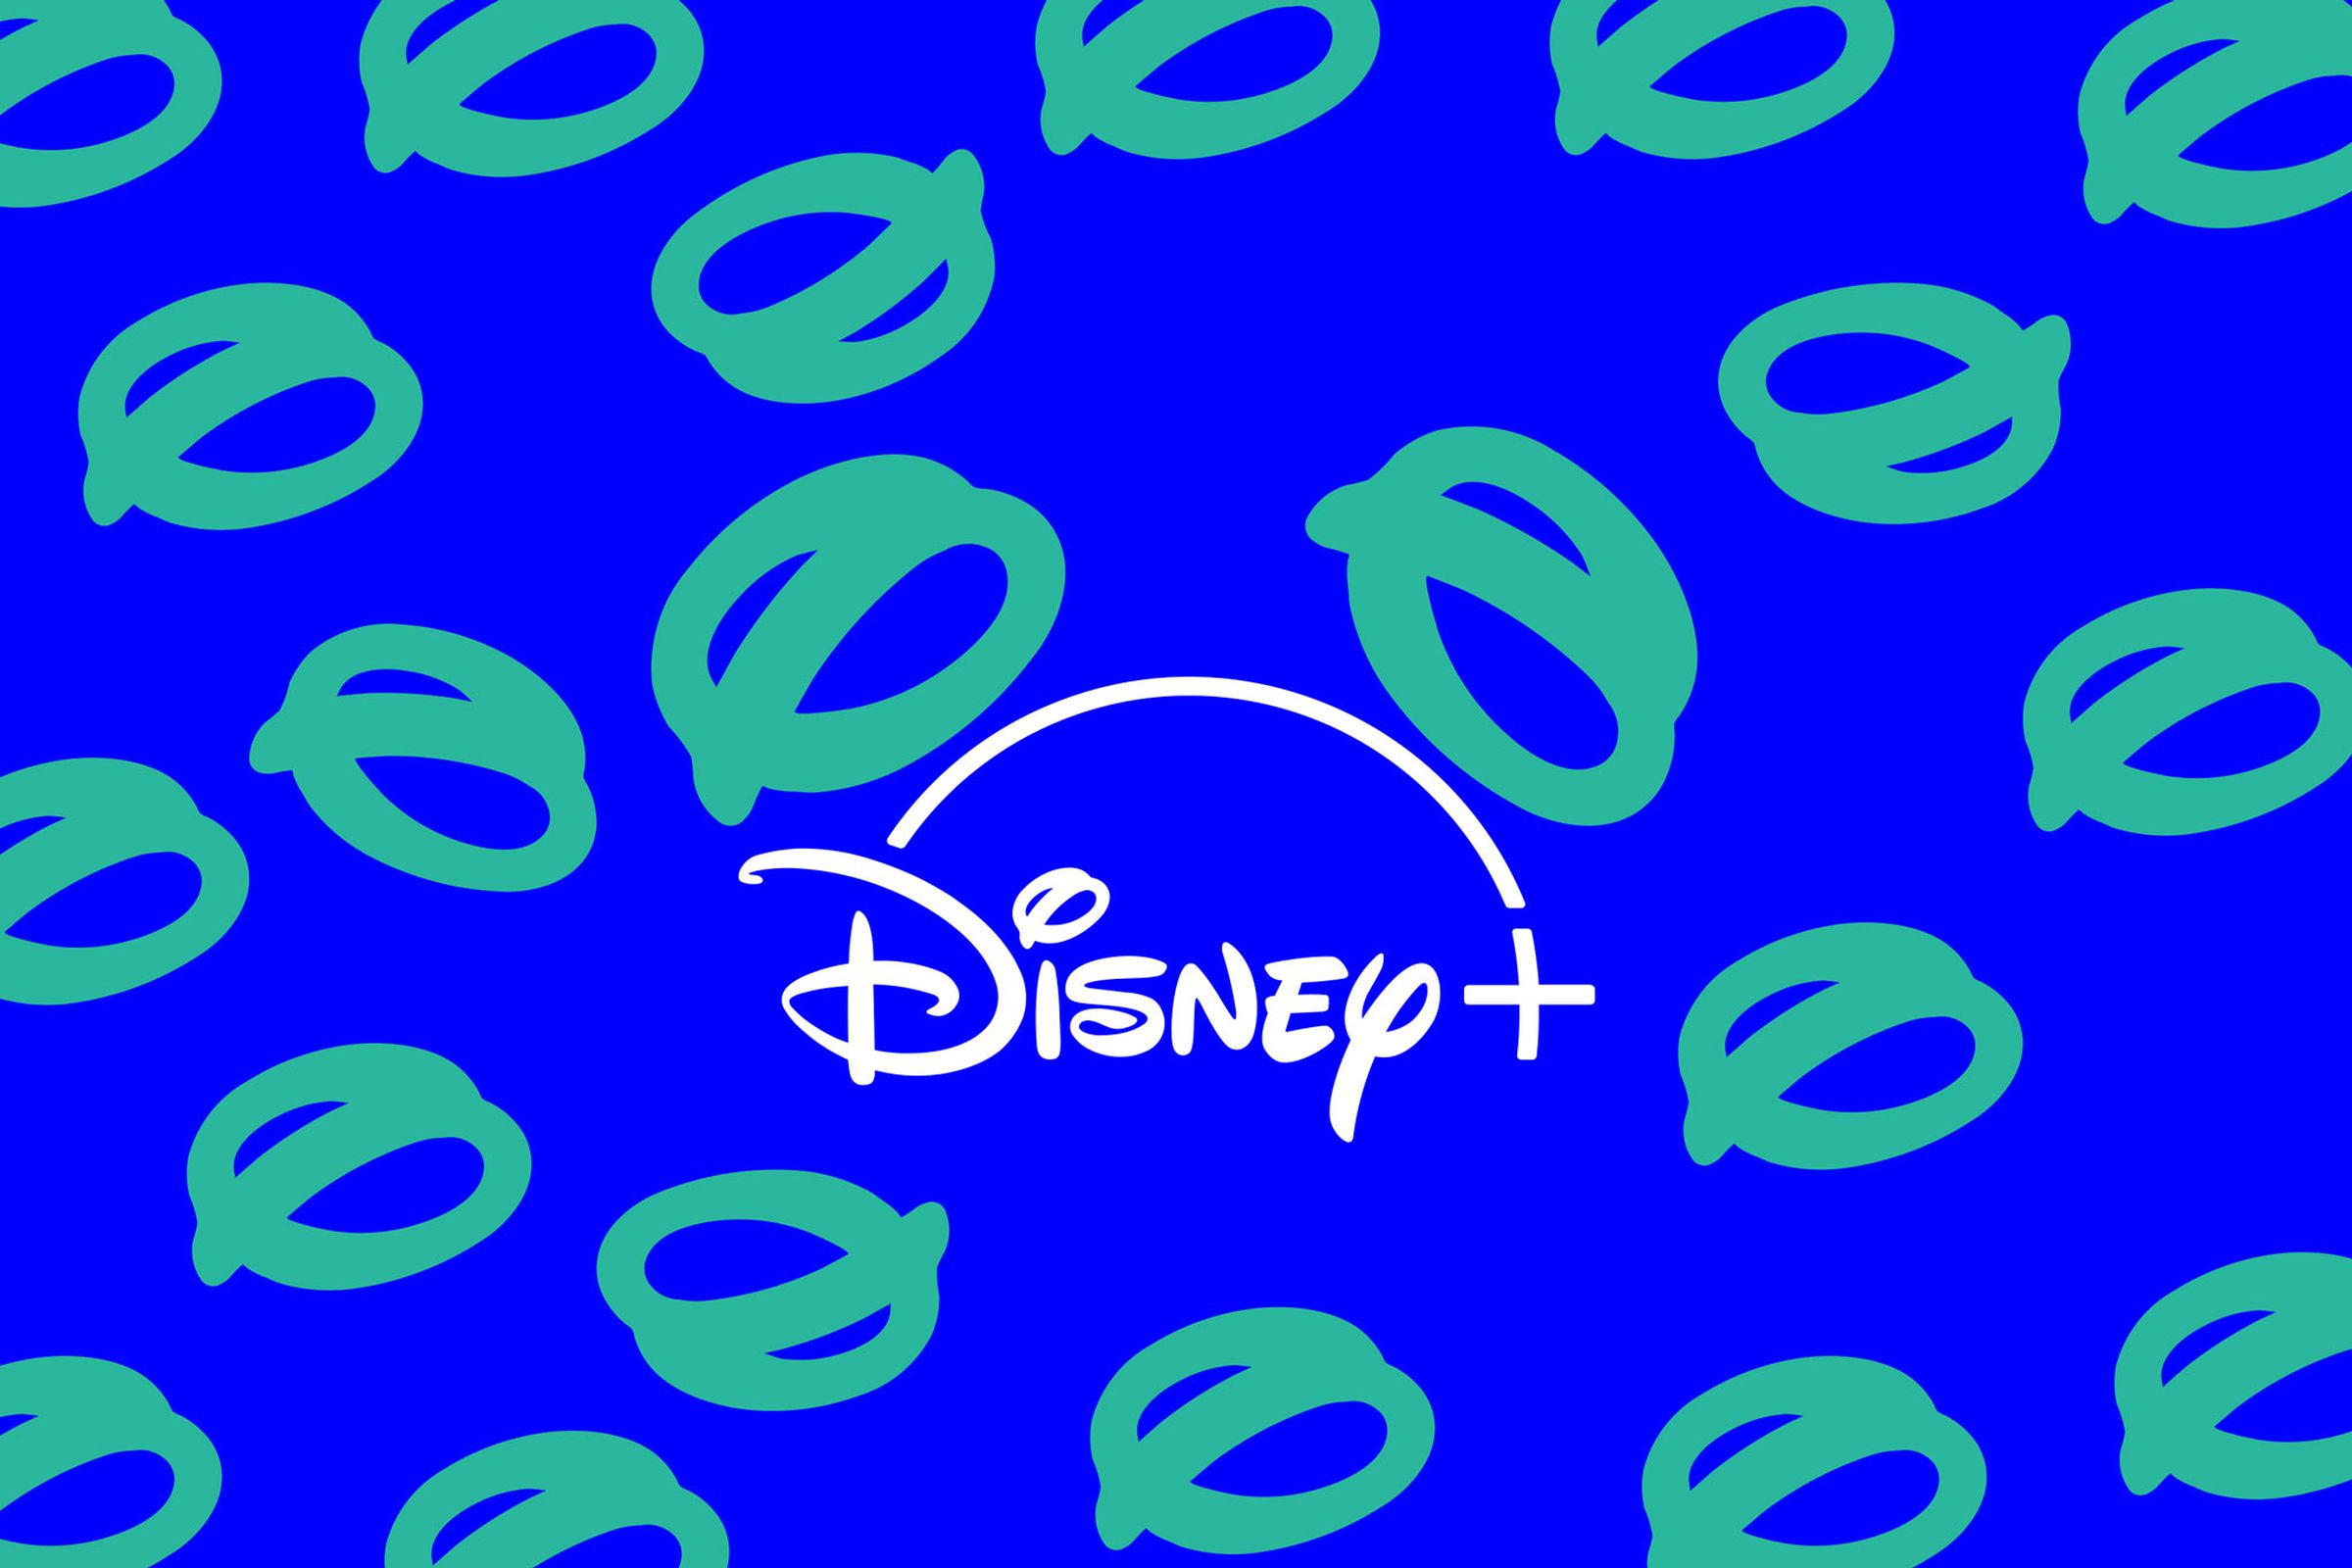 An image showing the Disney Plus logo on a blue background